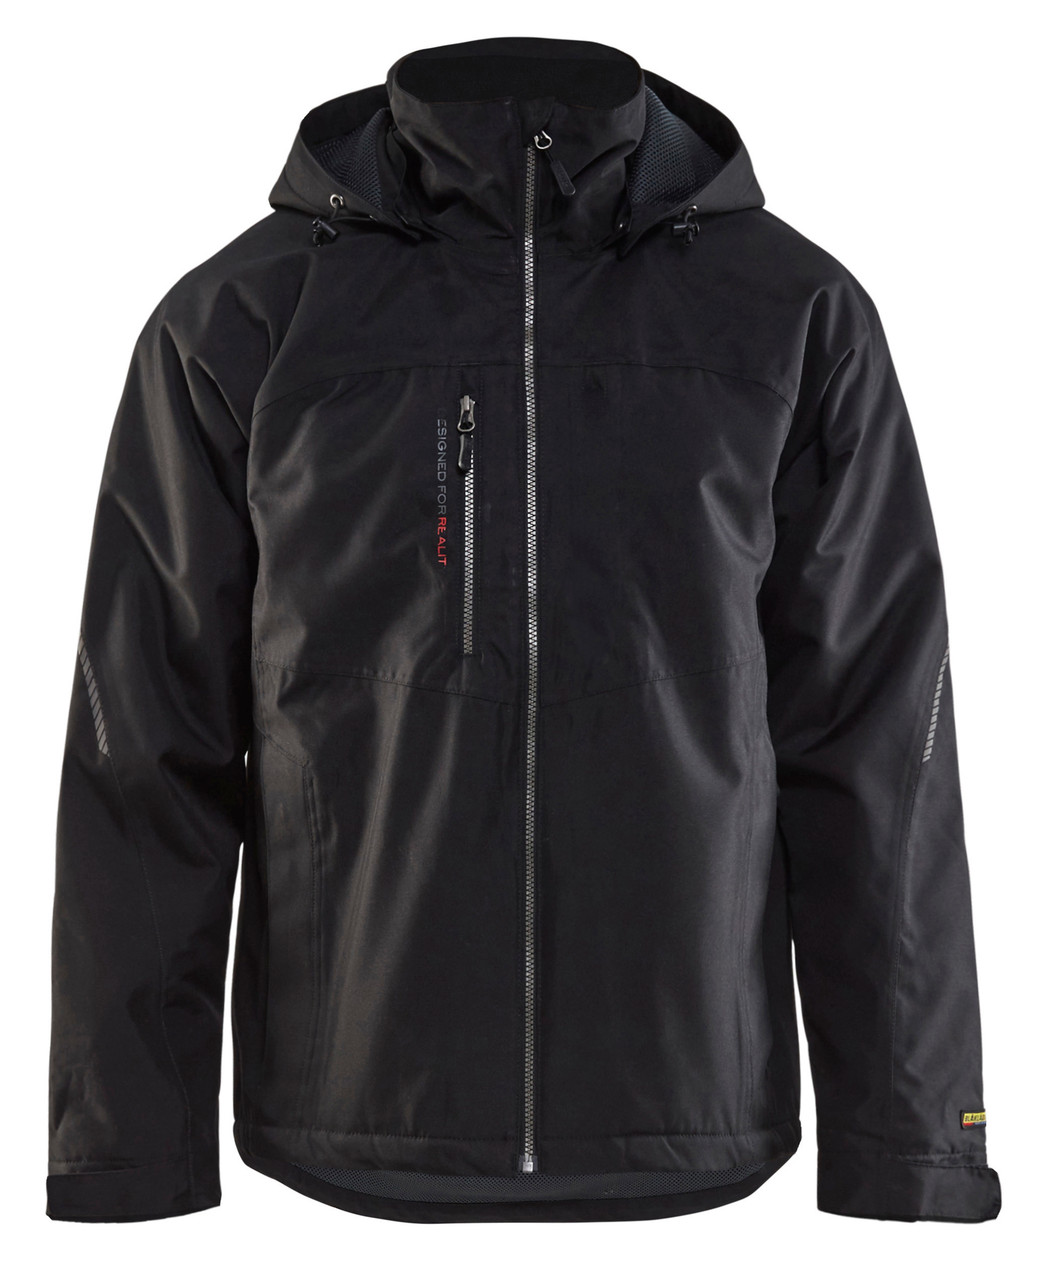 Stay dry and stylish on your next hike with the Blaklader Men's Waterproof Black Shell Jacket. This durable jacket is perfect for harsh weather conditions and will keep you protected on the trails.